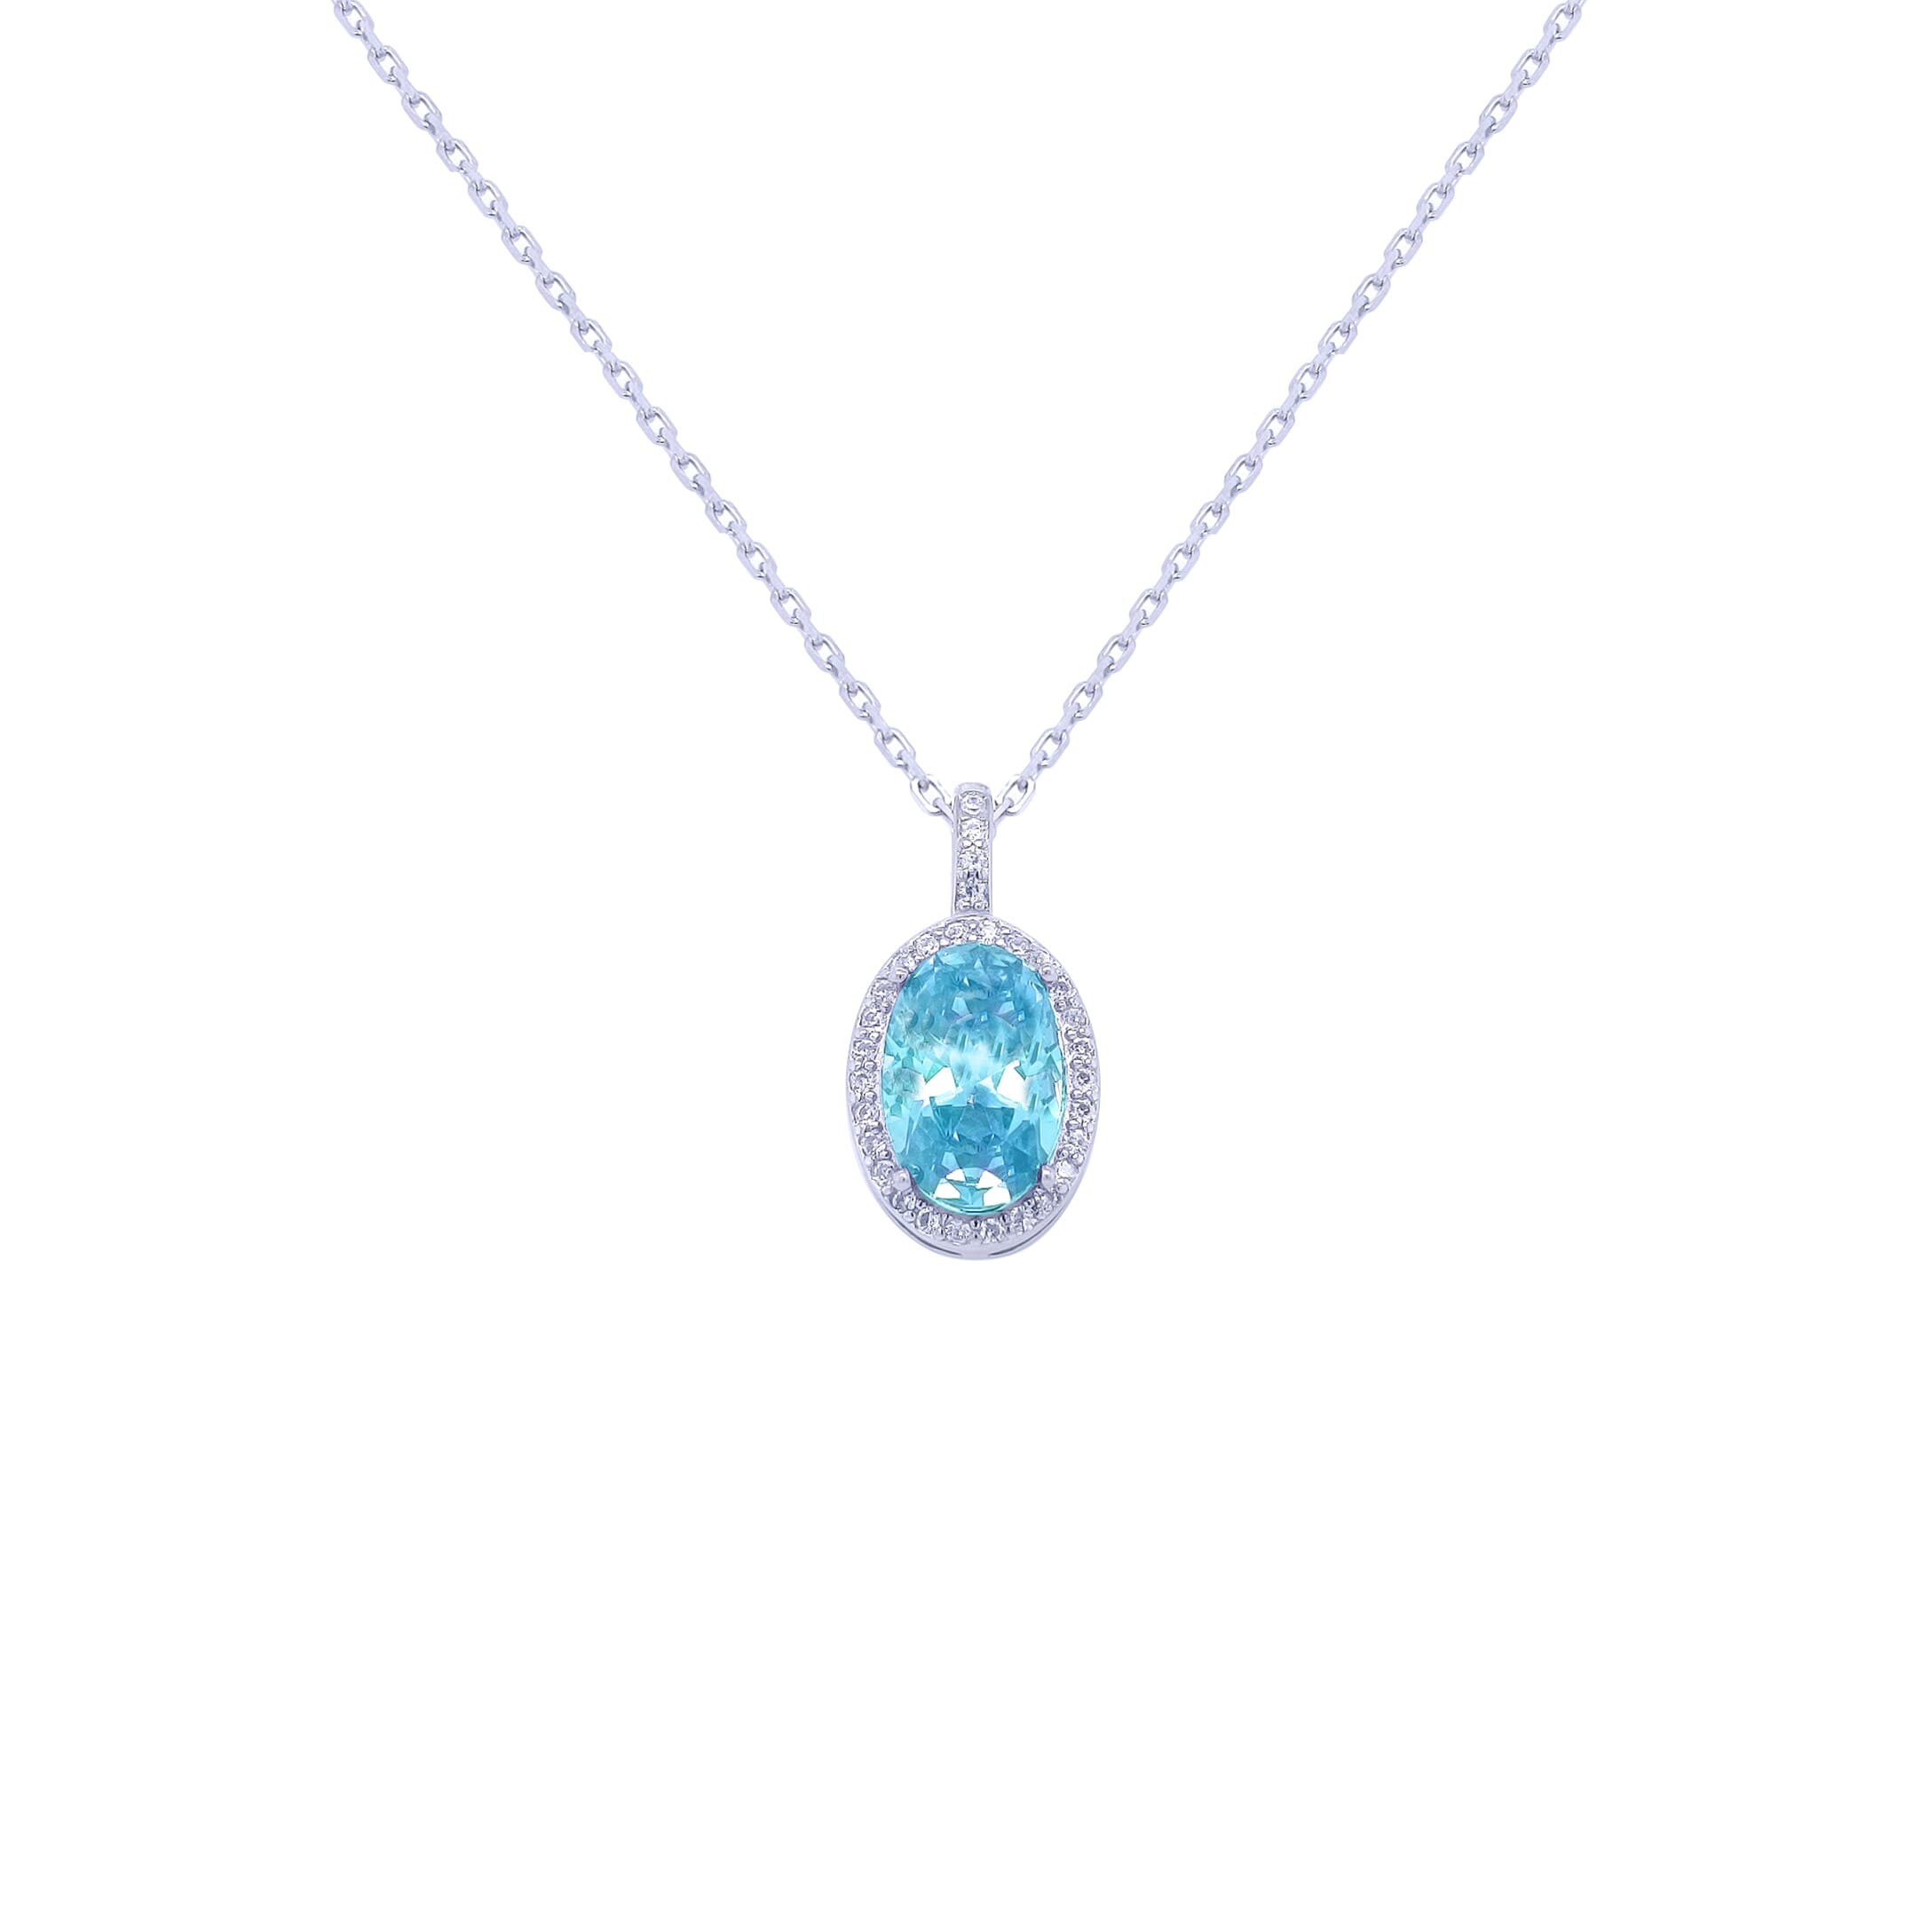 Asfour 925 Sterling Silver Necklace With Oval Blue Topaze Pendant